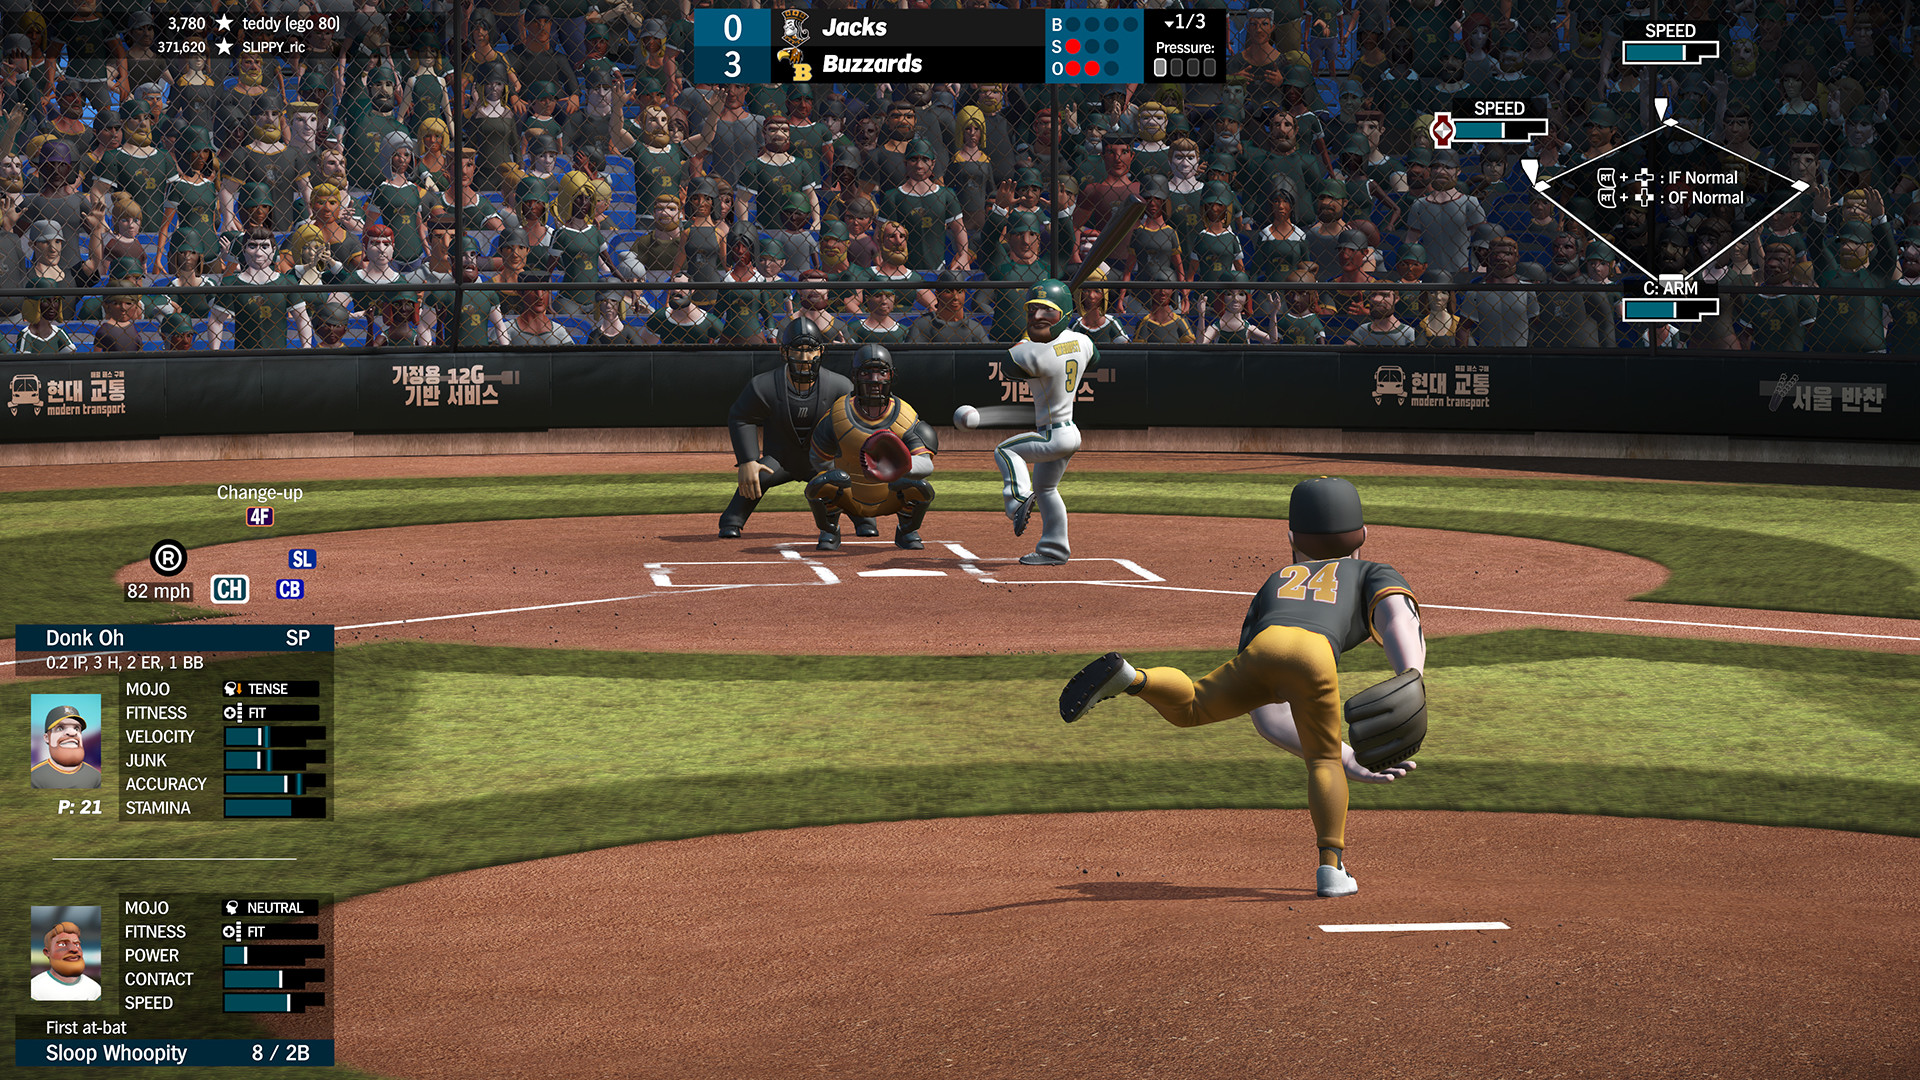 Super Mega Baseball 3 is Free to Play on Steam Until April 2